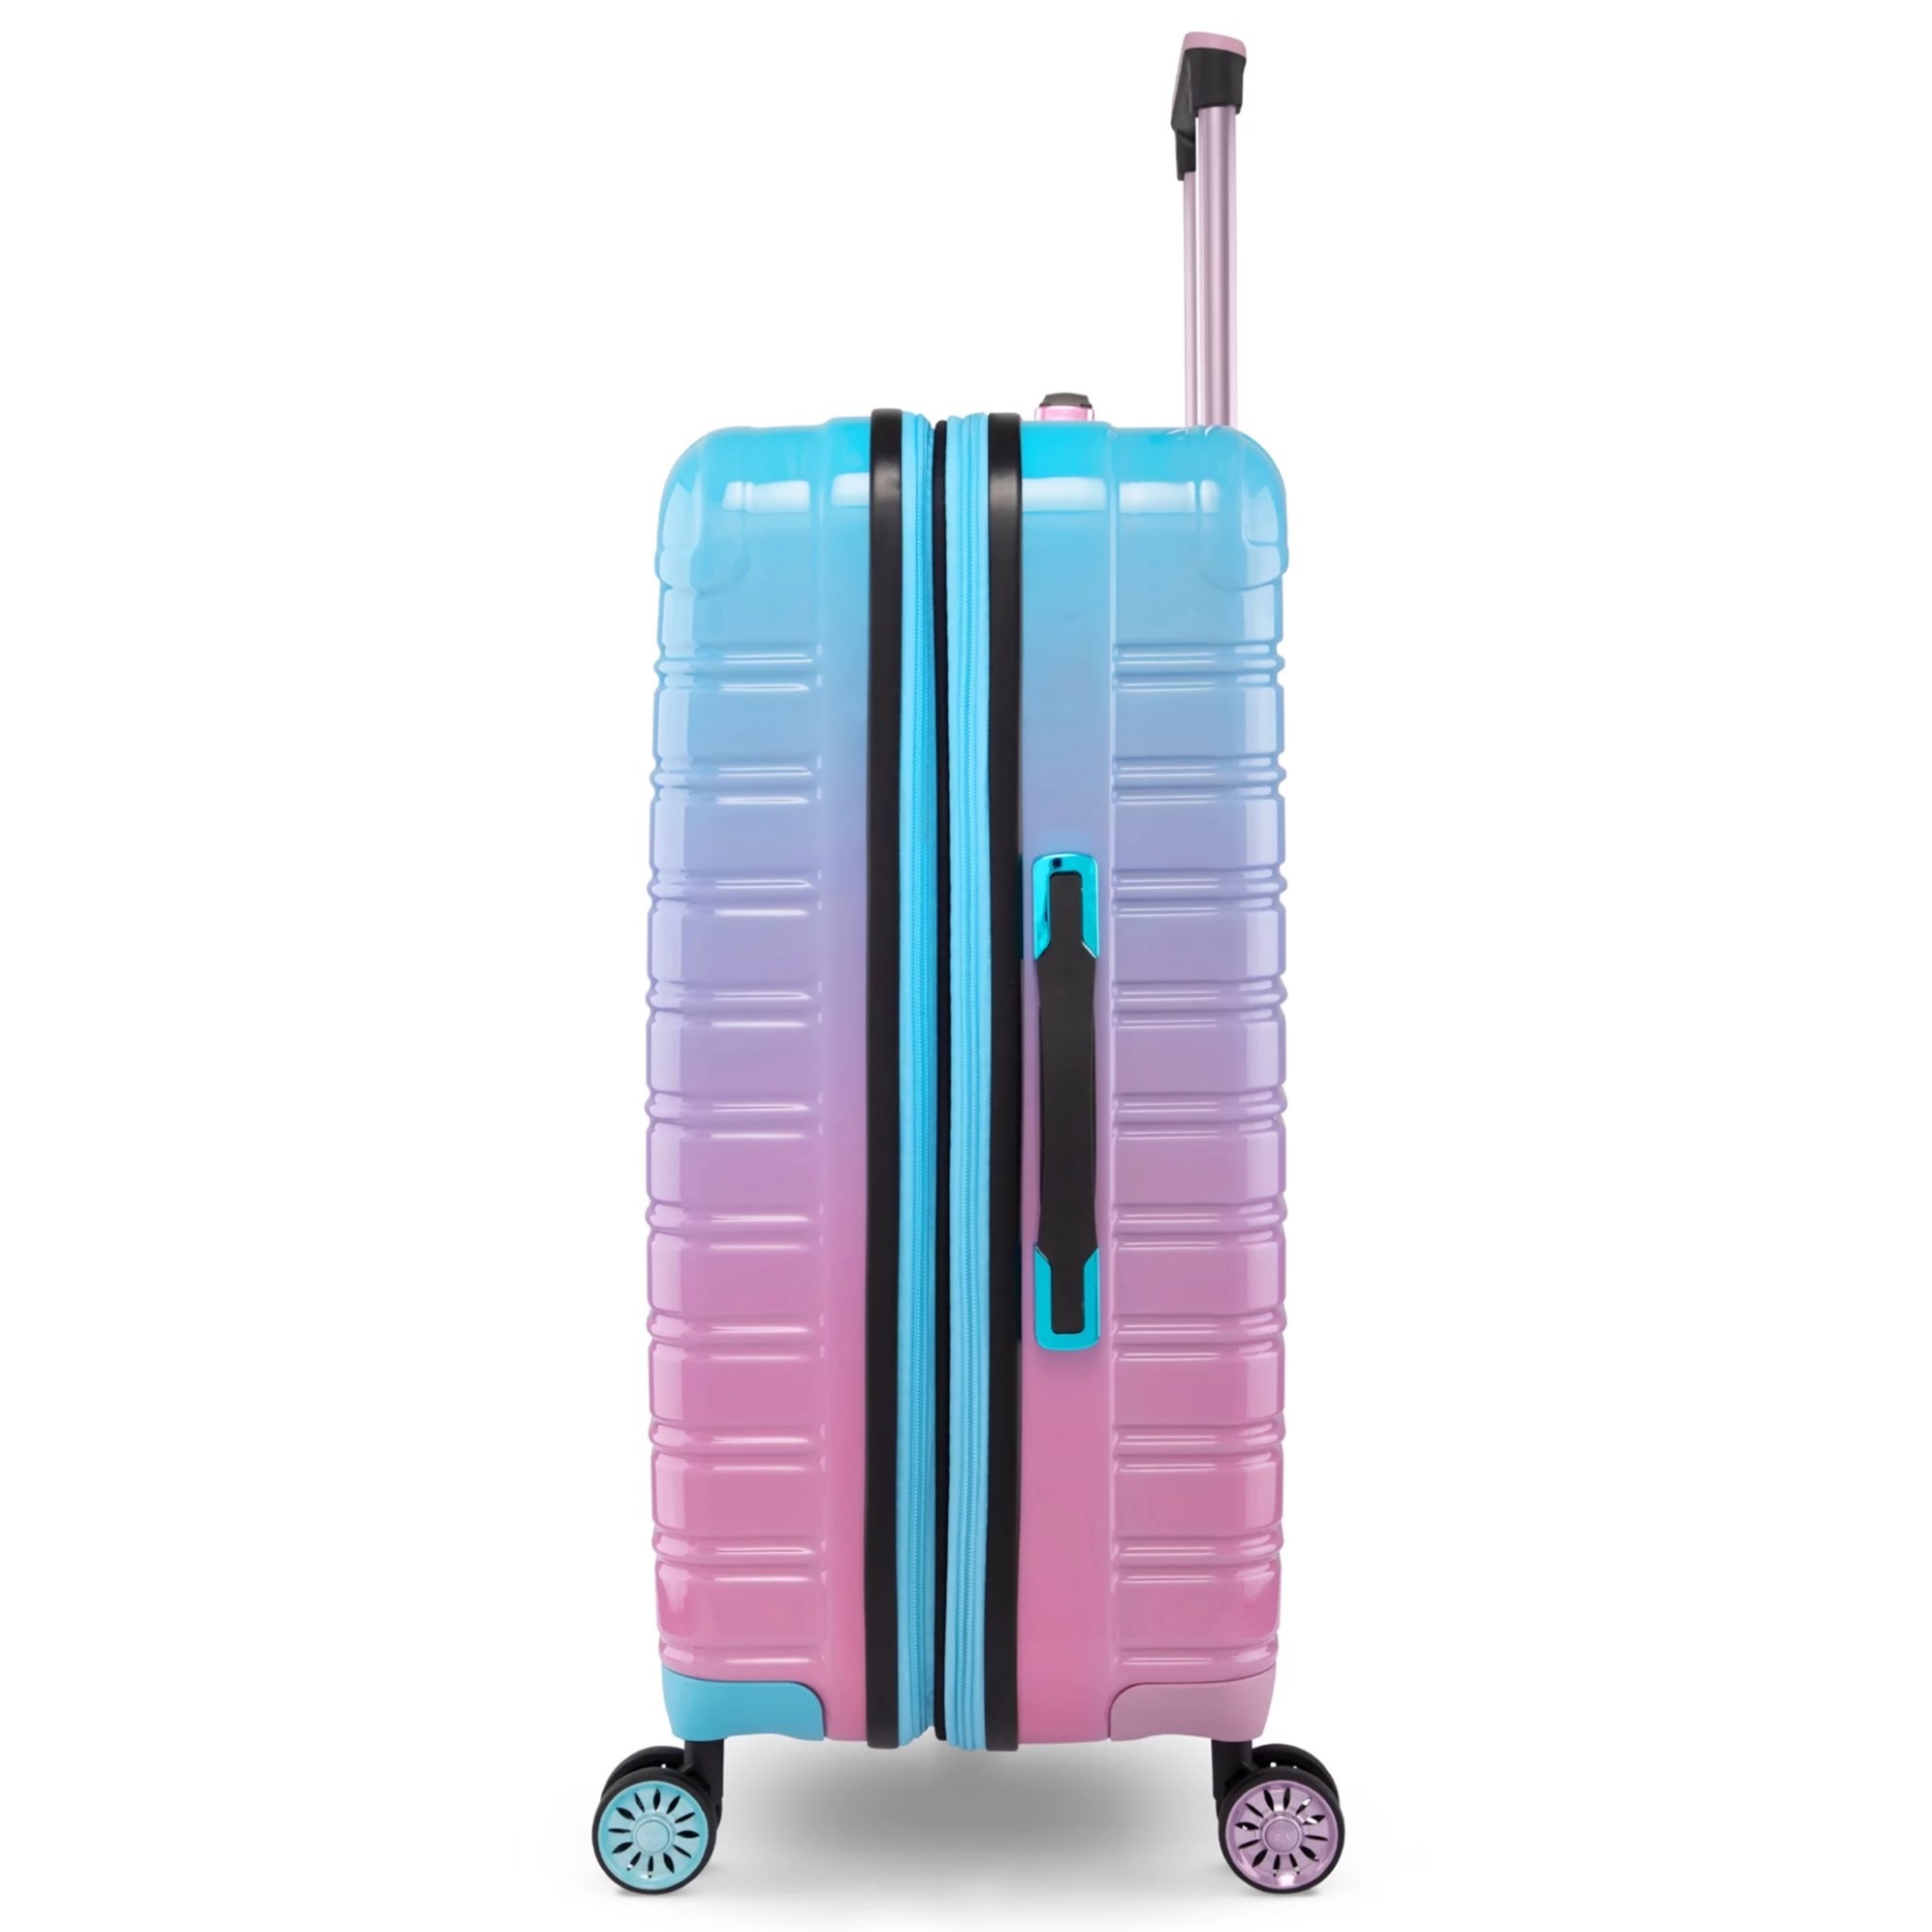 VALI DU LỊCH IFLY FIBERTECH OMBRE HARDSIDE LUGGAGE IN COTTON CANDY 1